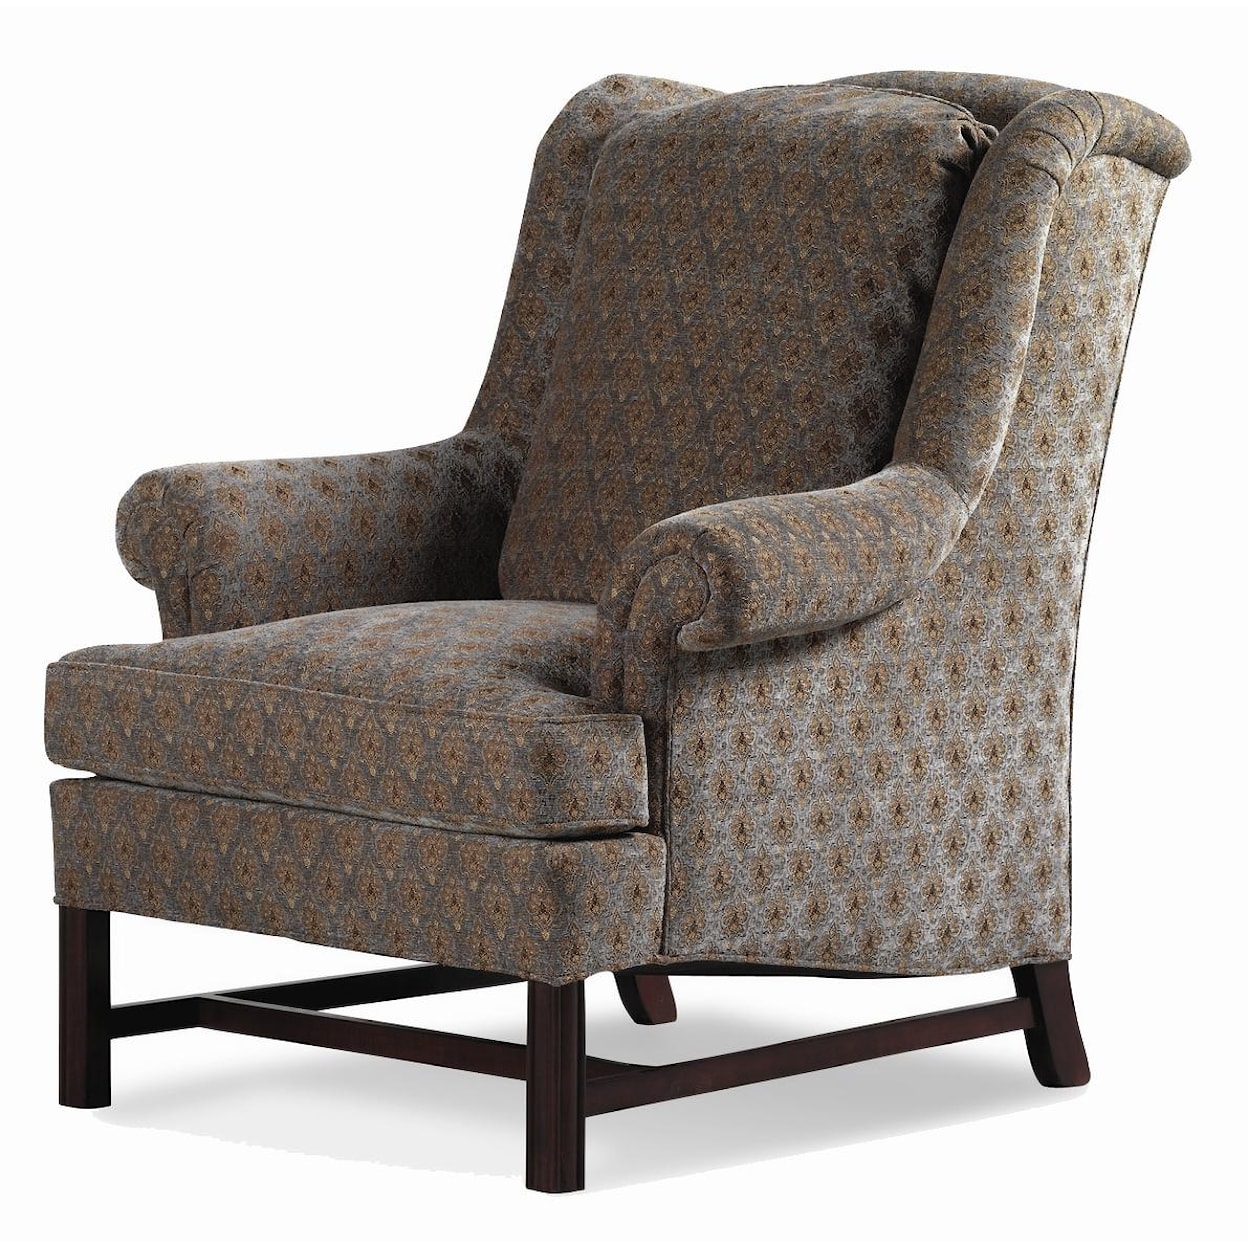 Jessica Charles Fine Upholstered Accents Alexander Chippendale Wing Chair